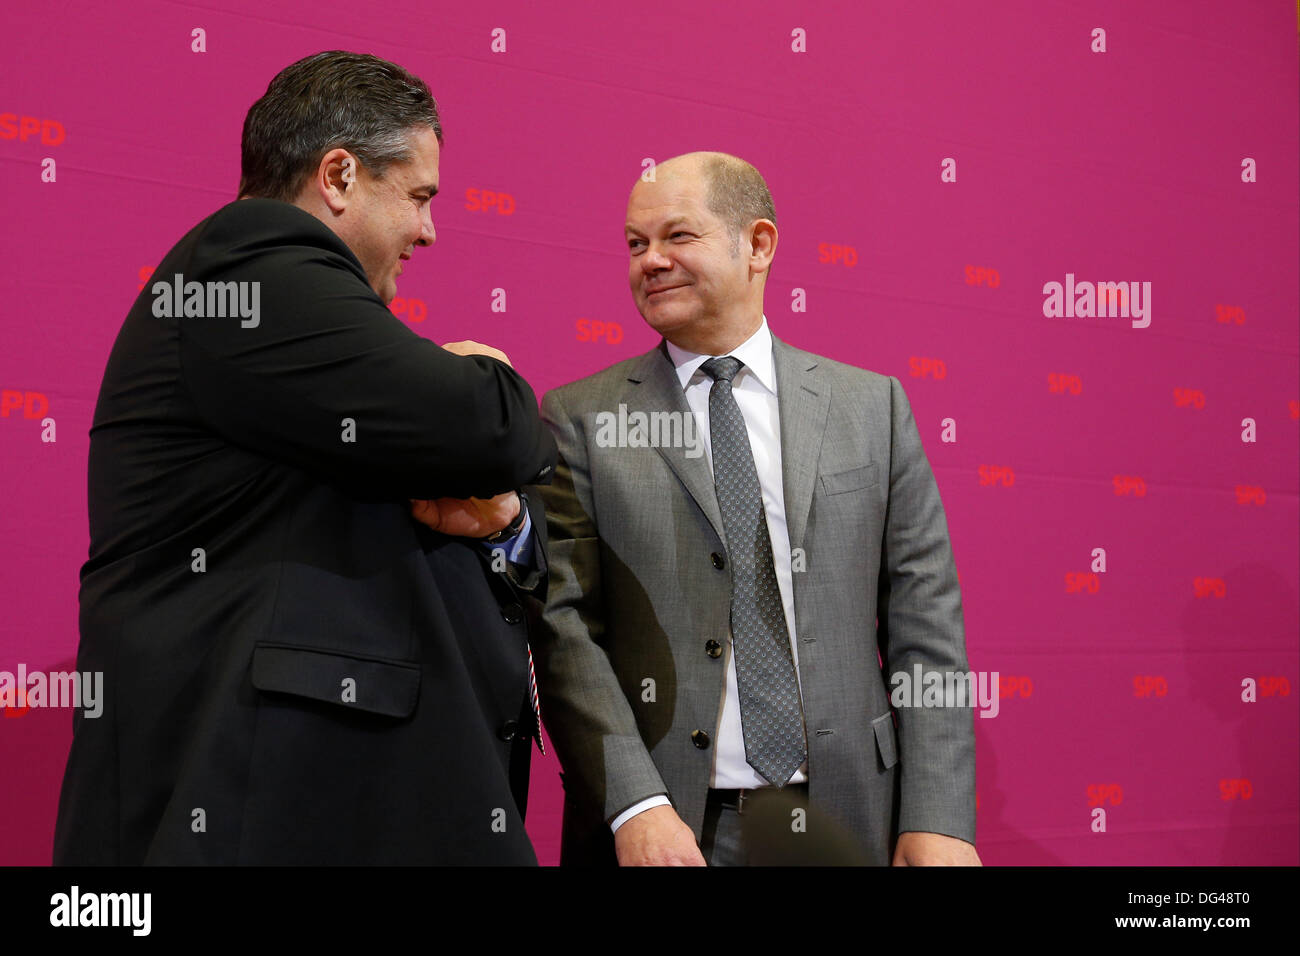 Berlin, Germany. 14th October, 2013. Meeting of the SPD party executive committee in the Willy Brandt house in Berlin. / Picture: Sigmar Gabriel (SPD), SPD party chairman, talking with Olaf Scholz (SPD), SPD mayor of Hamburg and Deputy Chairman, pictured during the SPD party executive committee in Berlin. Credit:  Reynaldo Chaib Paganelli/Alamy Live News Stock Photo